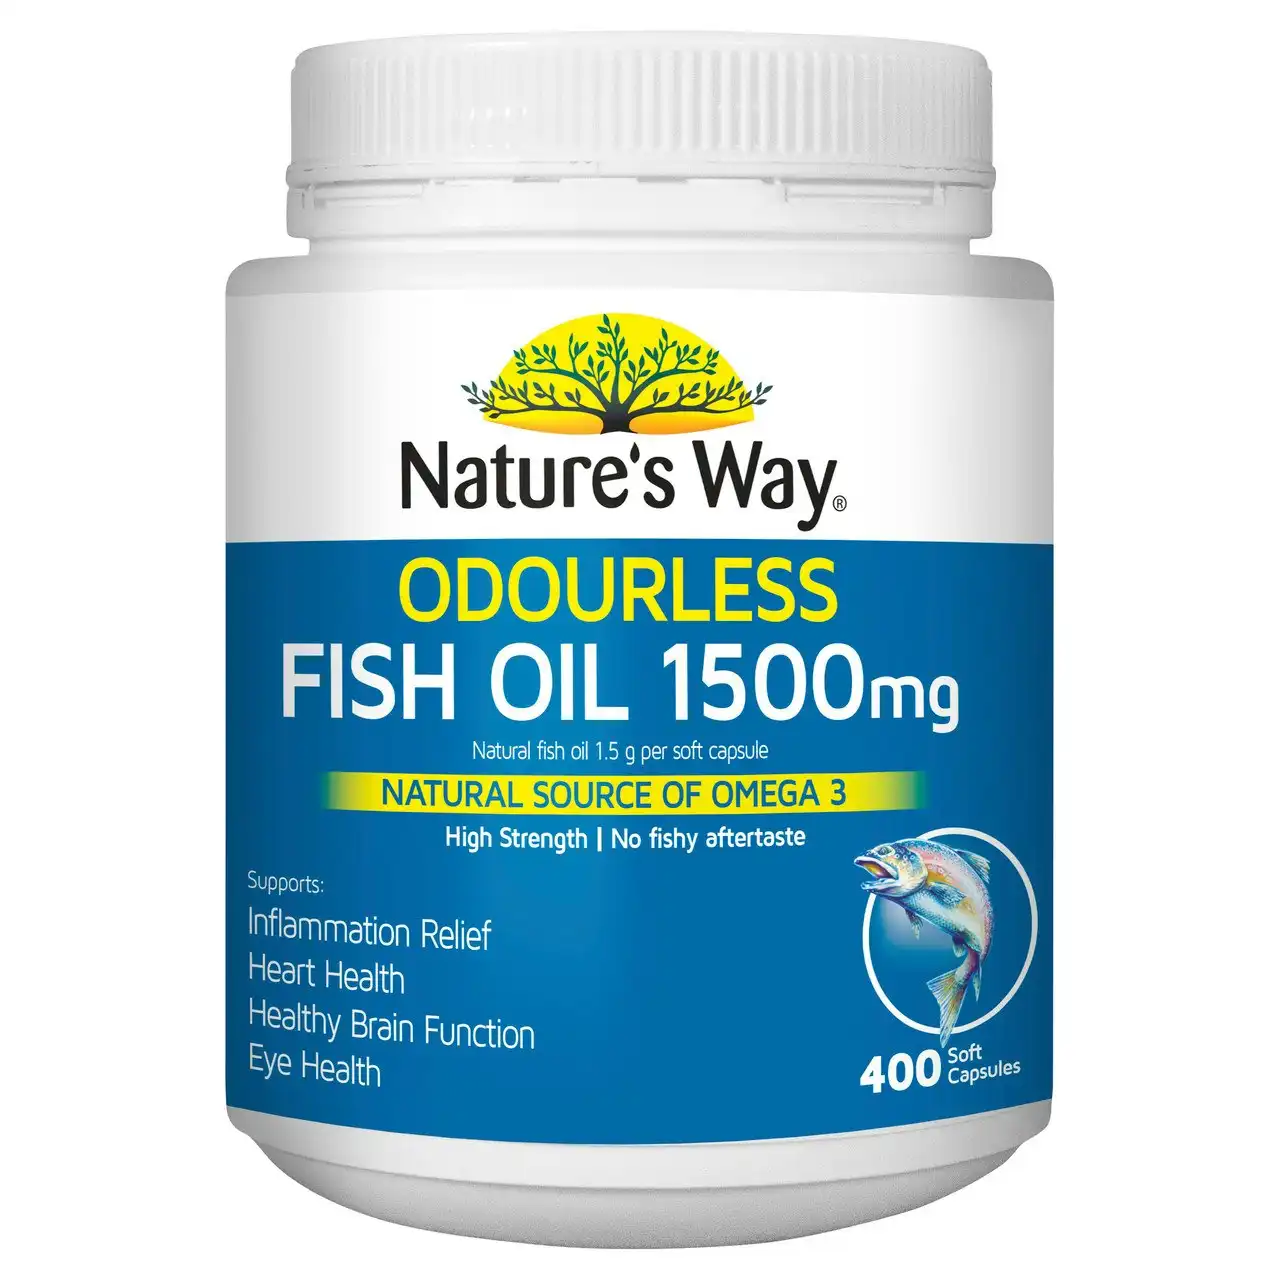 Nature's Way Odourless Fish Oil 1500mg 400s